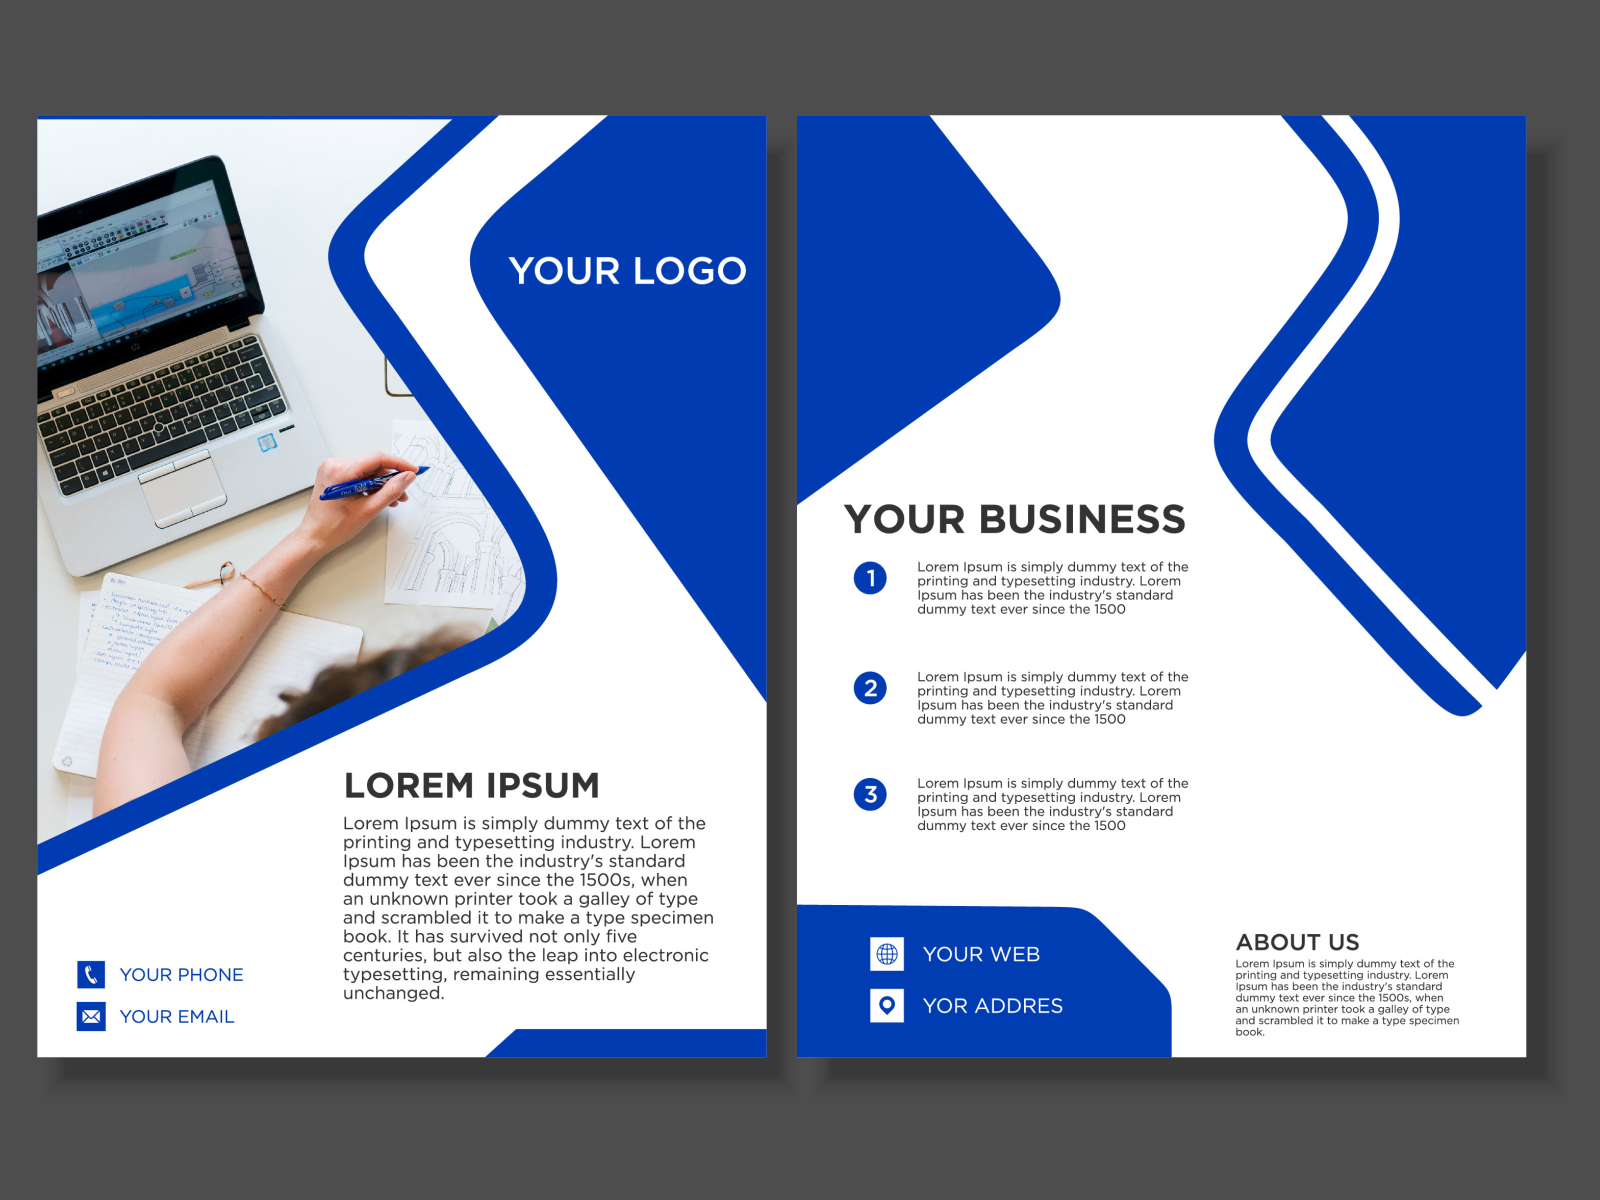 flyer design Converted by ahmad fadlan on Dribbble